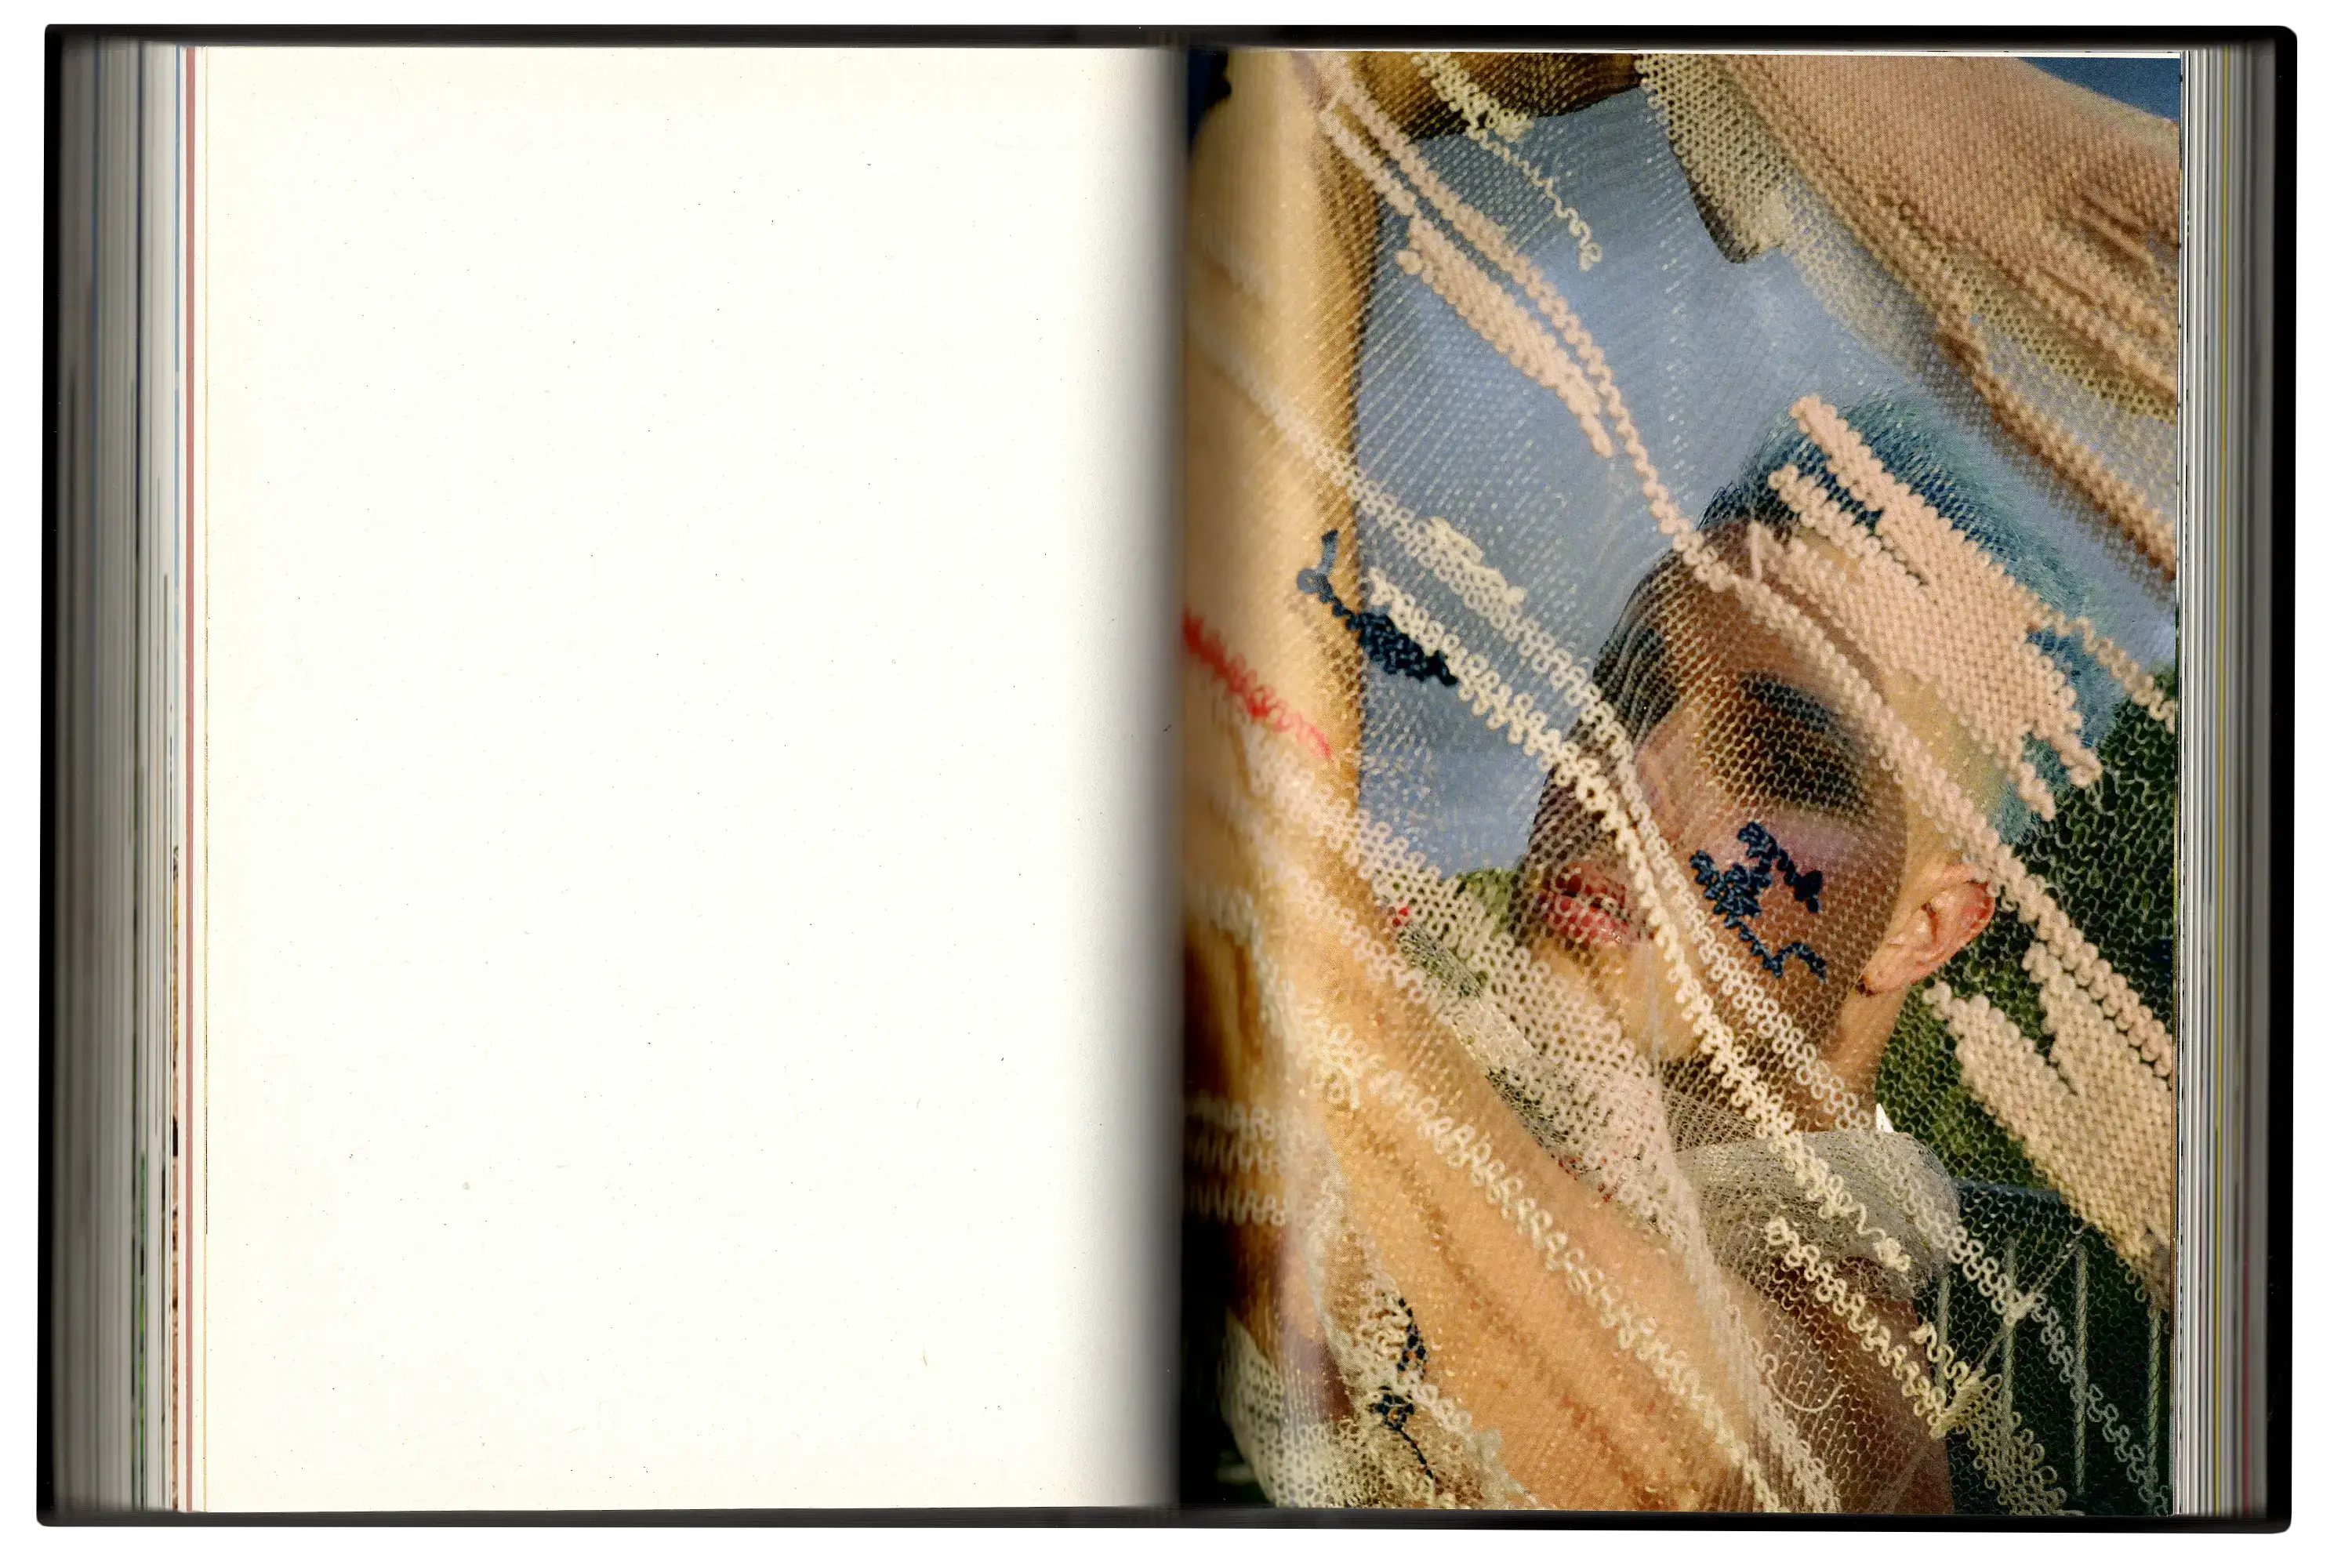 Imperfect Photo Book - blank left page, right page shows person draping fabric in front of them